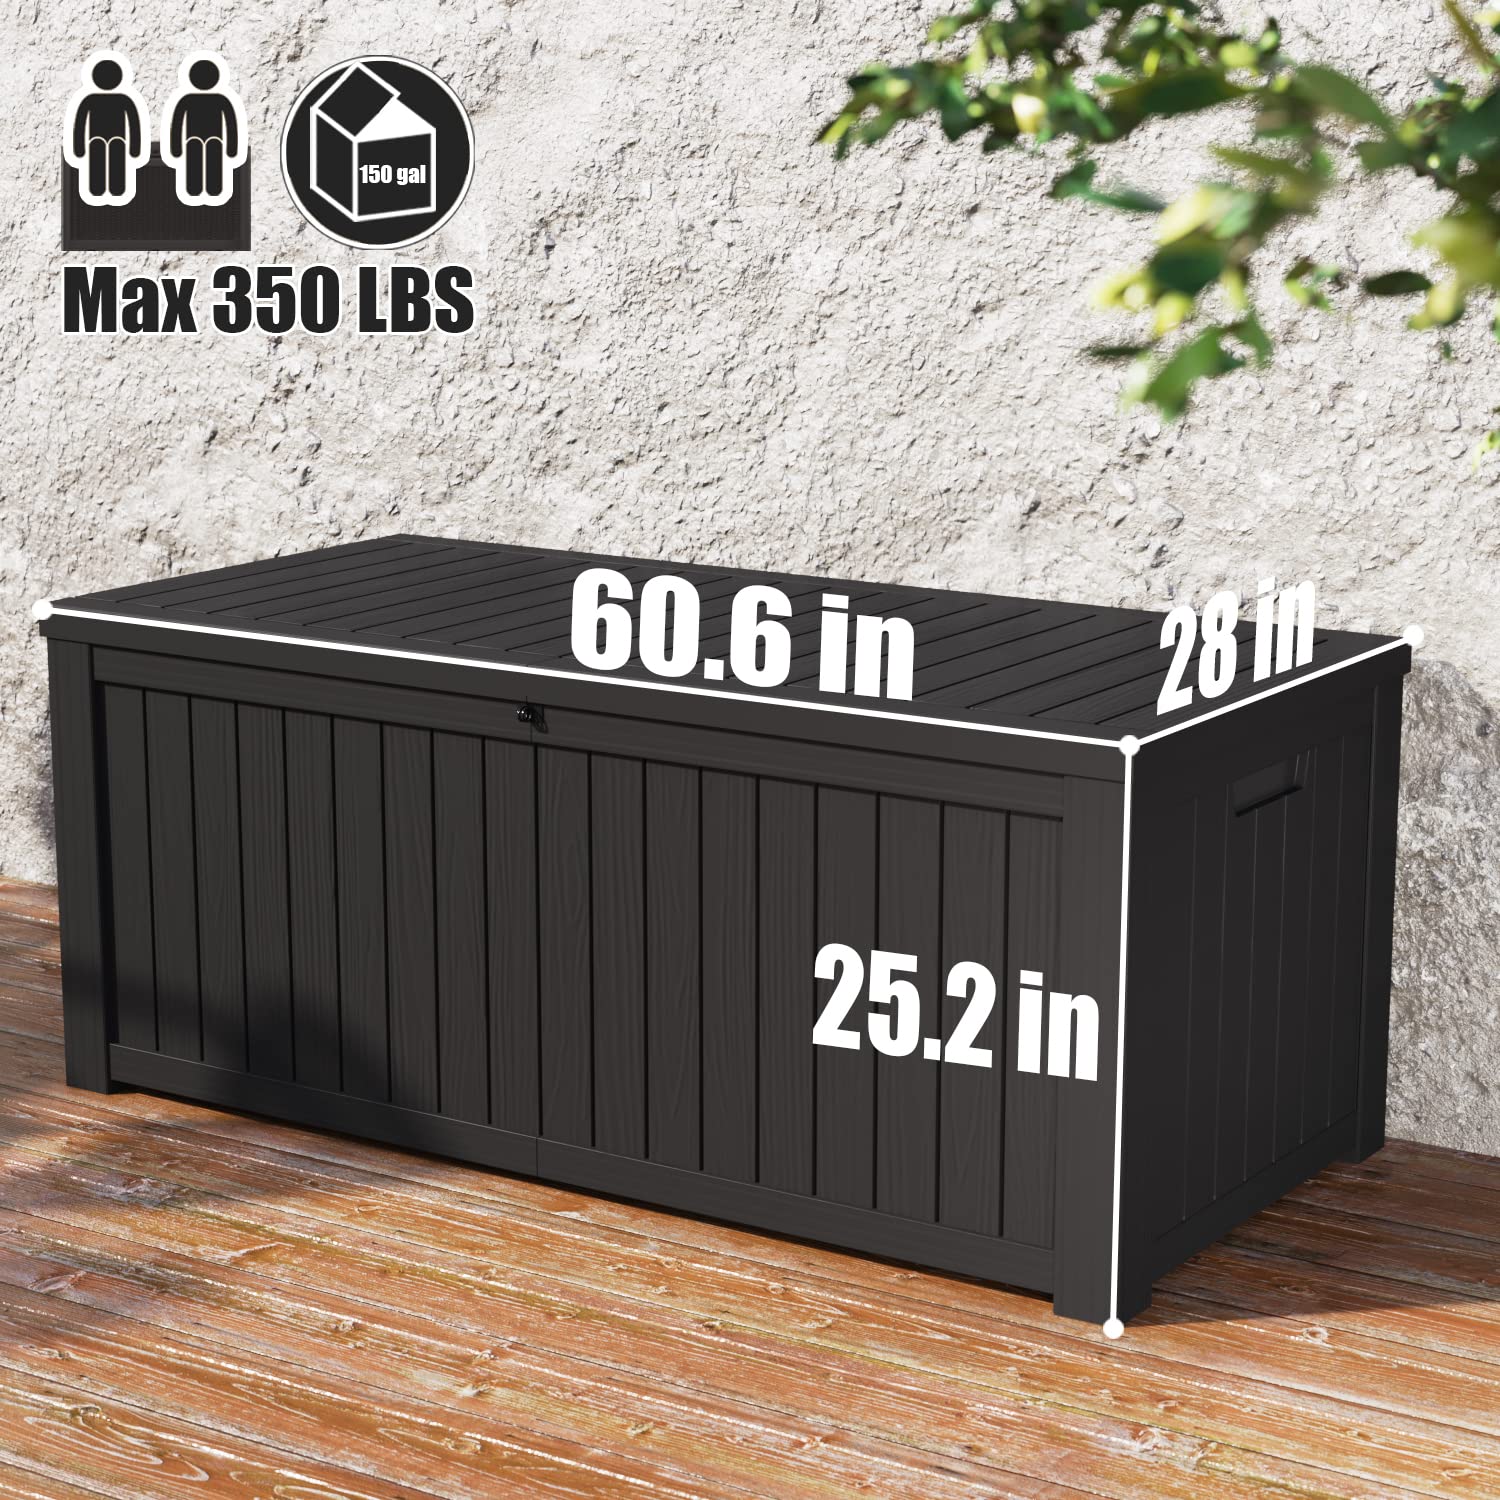 Greesum 100 Gallon Resin Deck Box Large Outdoor Storage for Patio Furniture, Garden Tools, Pool Supplies, Weatherproof and UV Resistant, Lockable, Grey